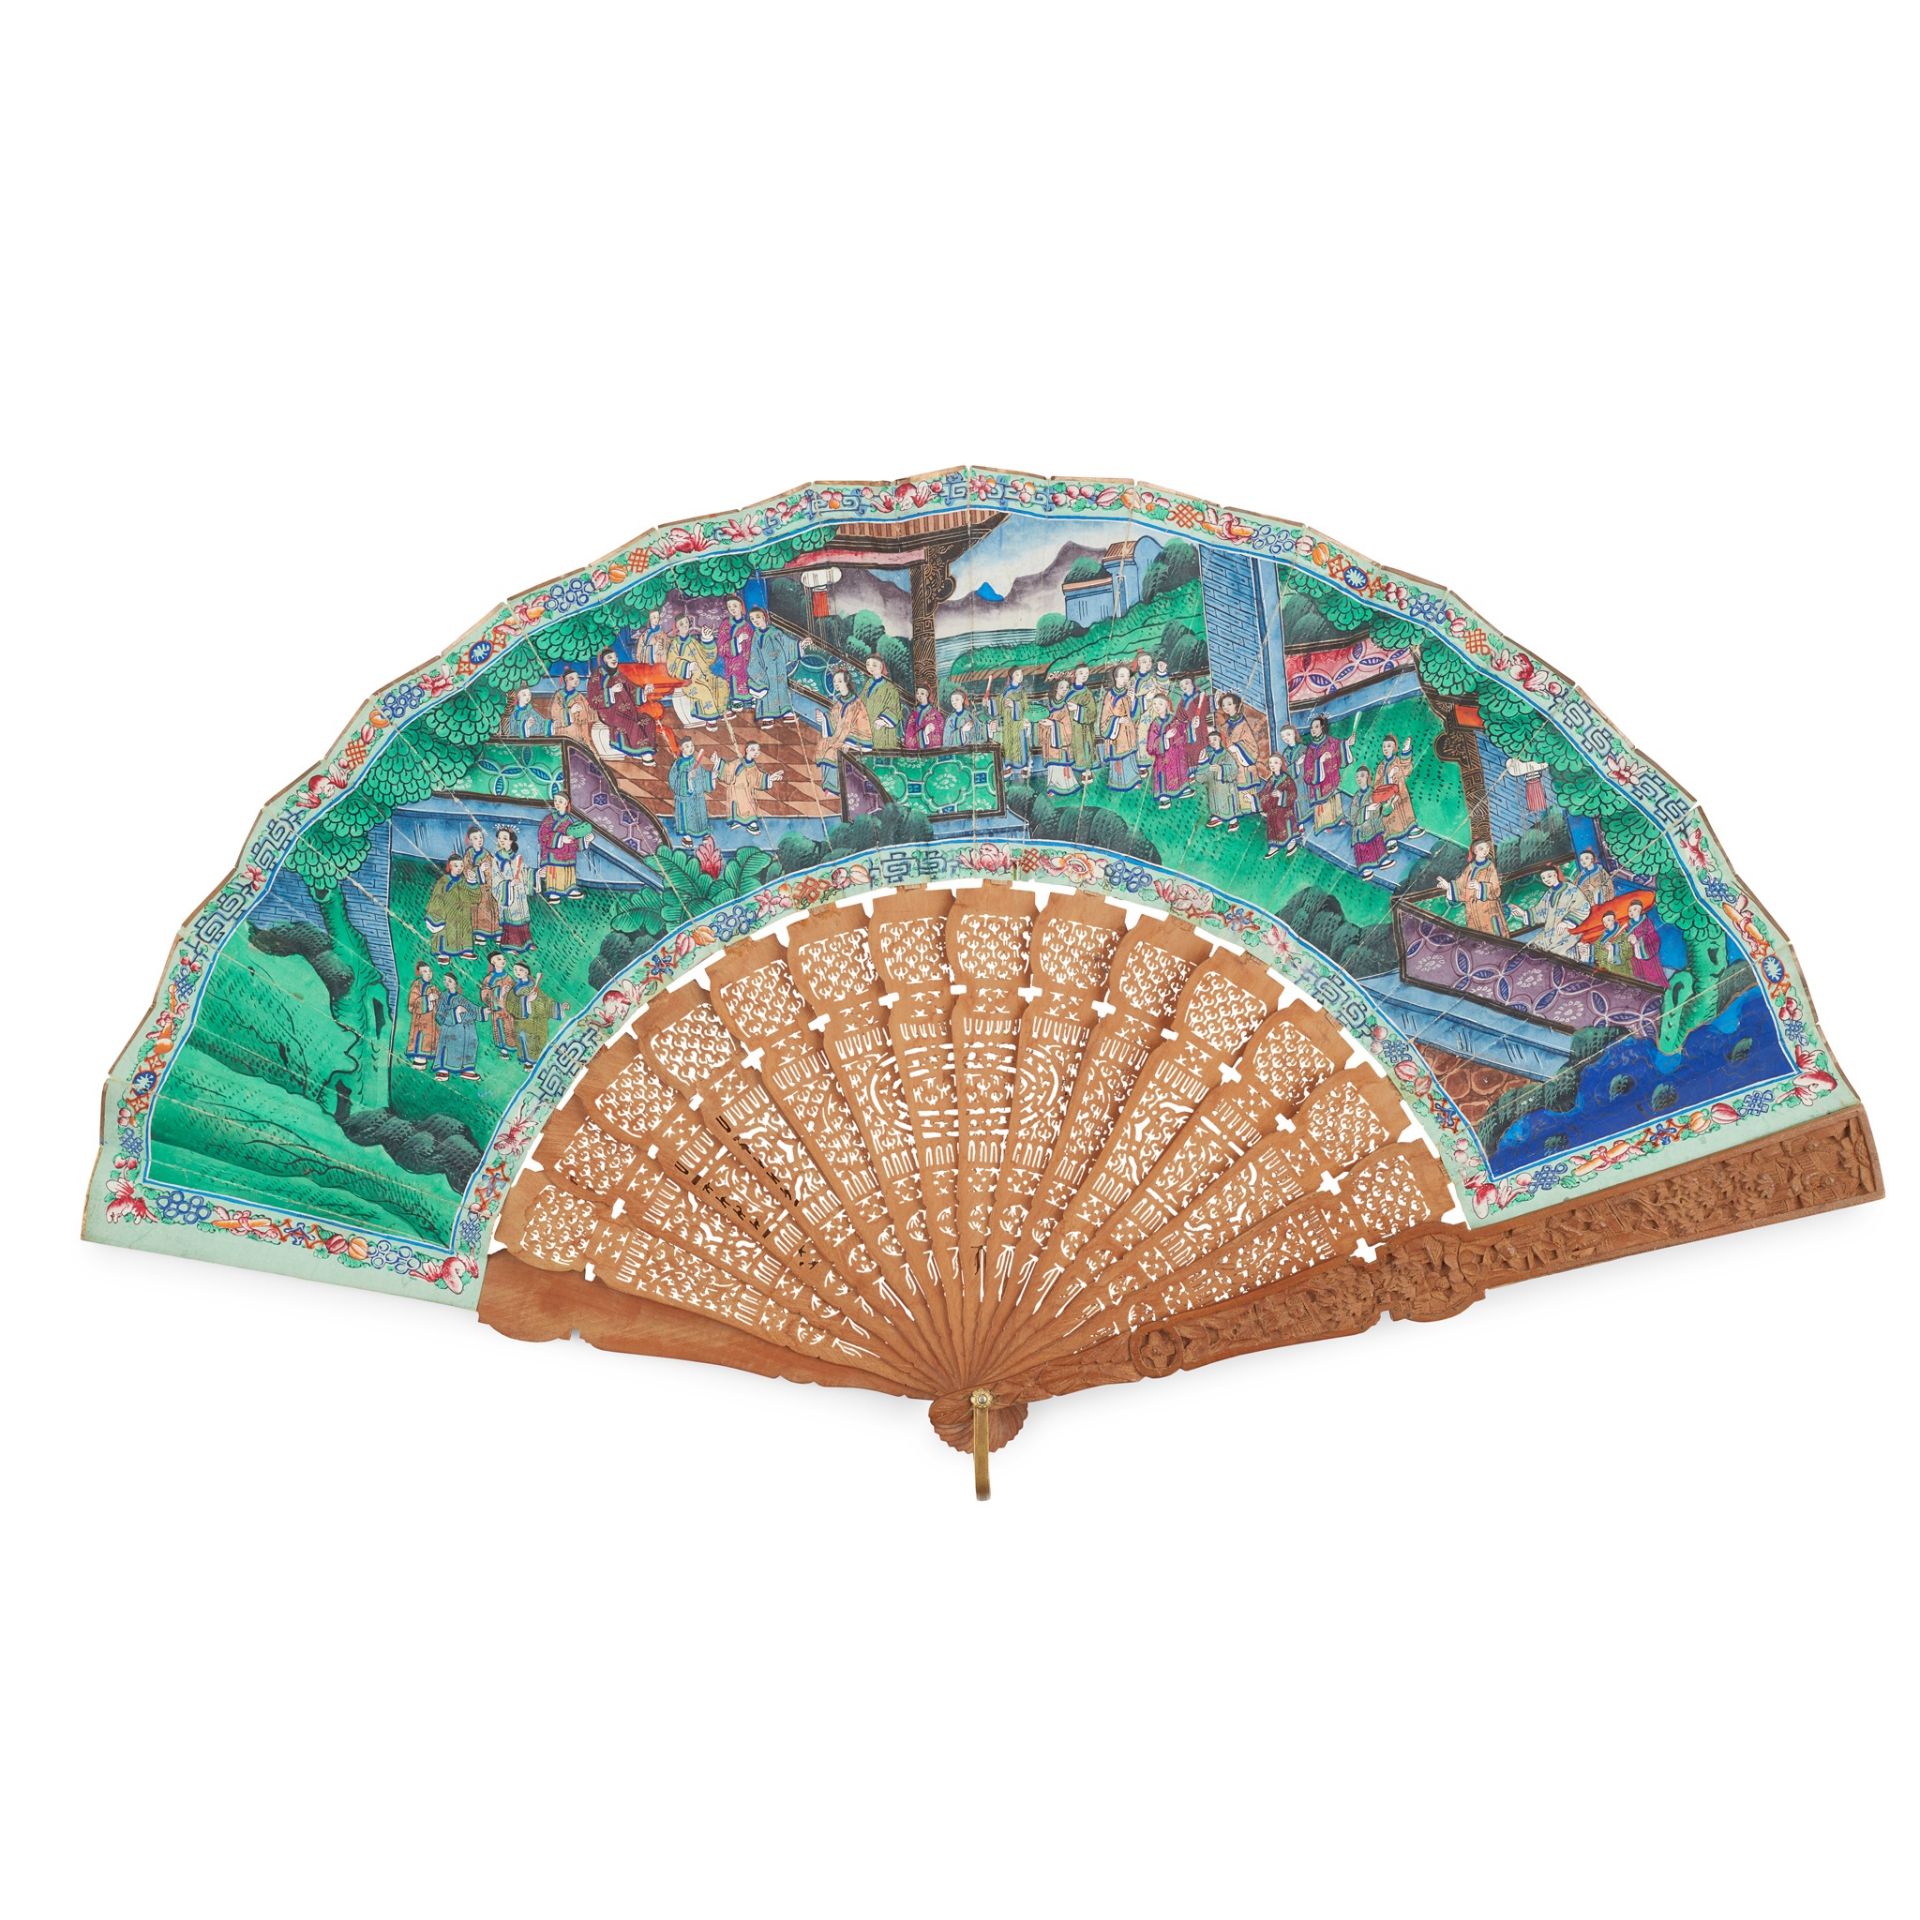 Y CANTON SANDALWOOD AND PAPER 'THOUSAND FACES' FAN QING DYNASTY, 19TH CENTURY - Bild 2 aus 2